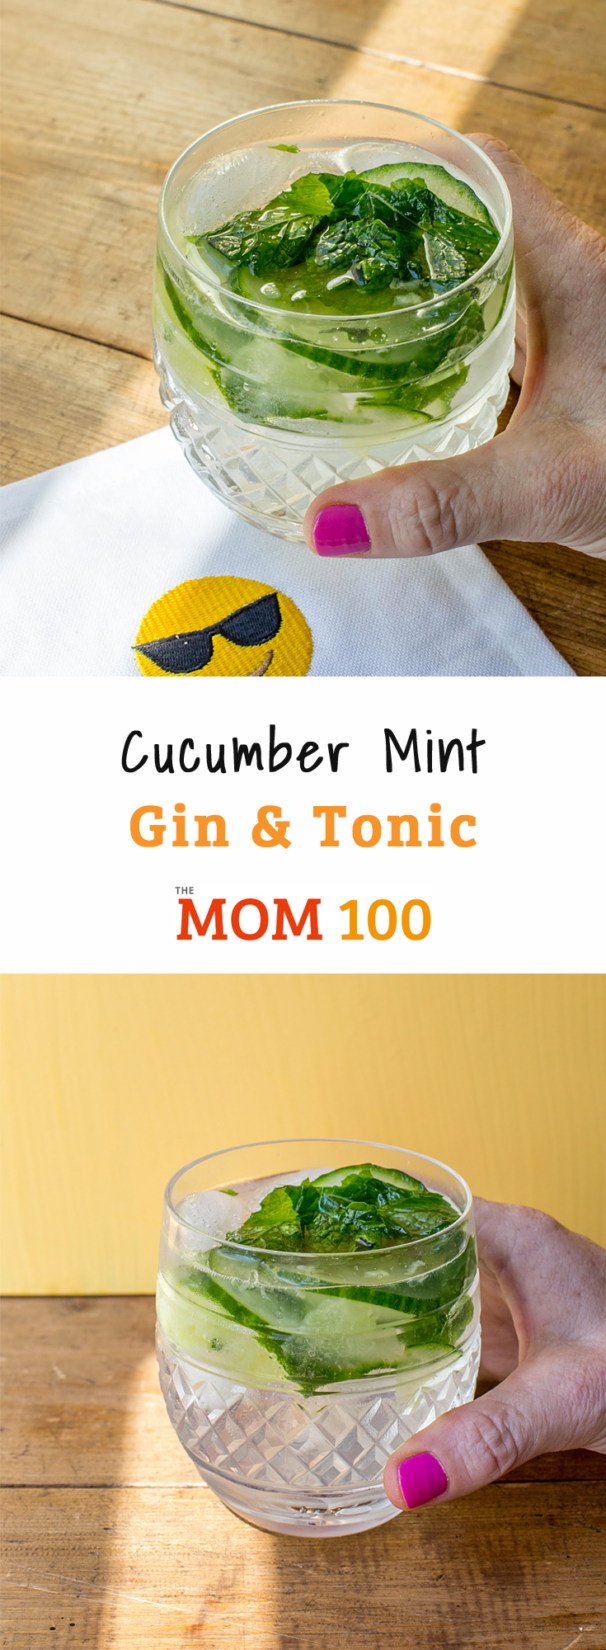 gin and tonic with mint and cucumber for mom 100